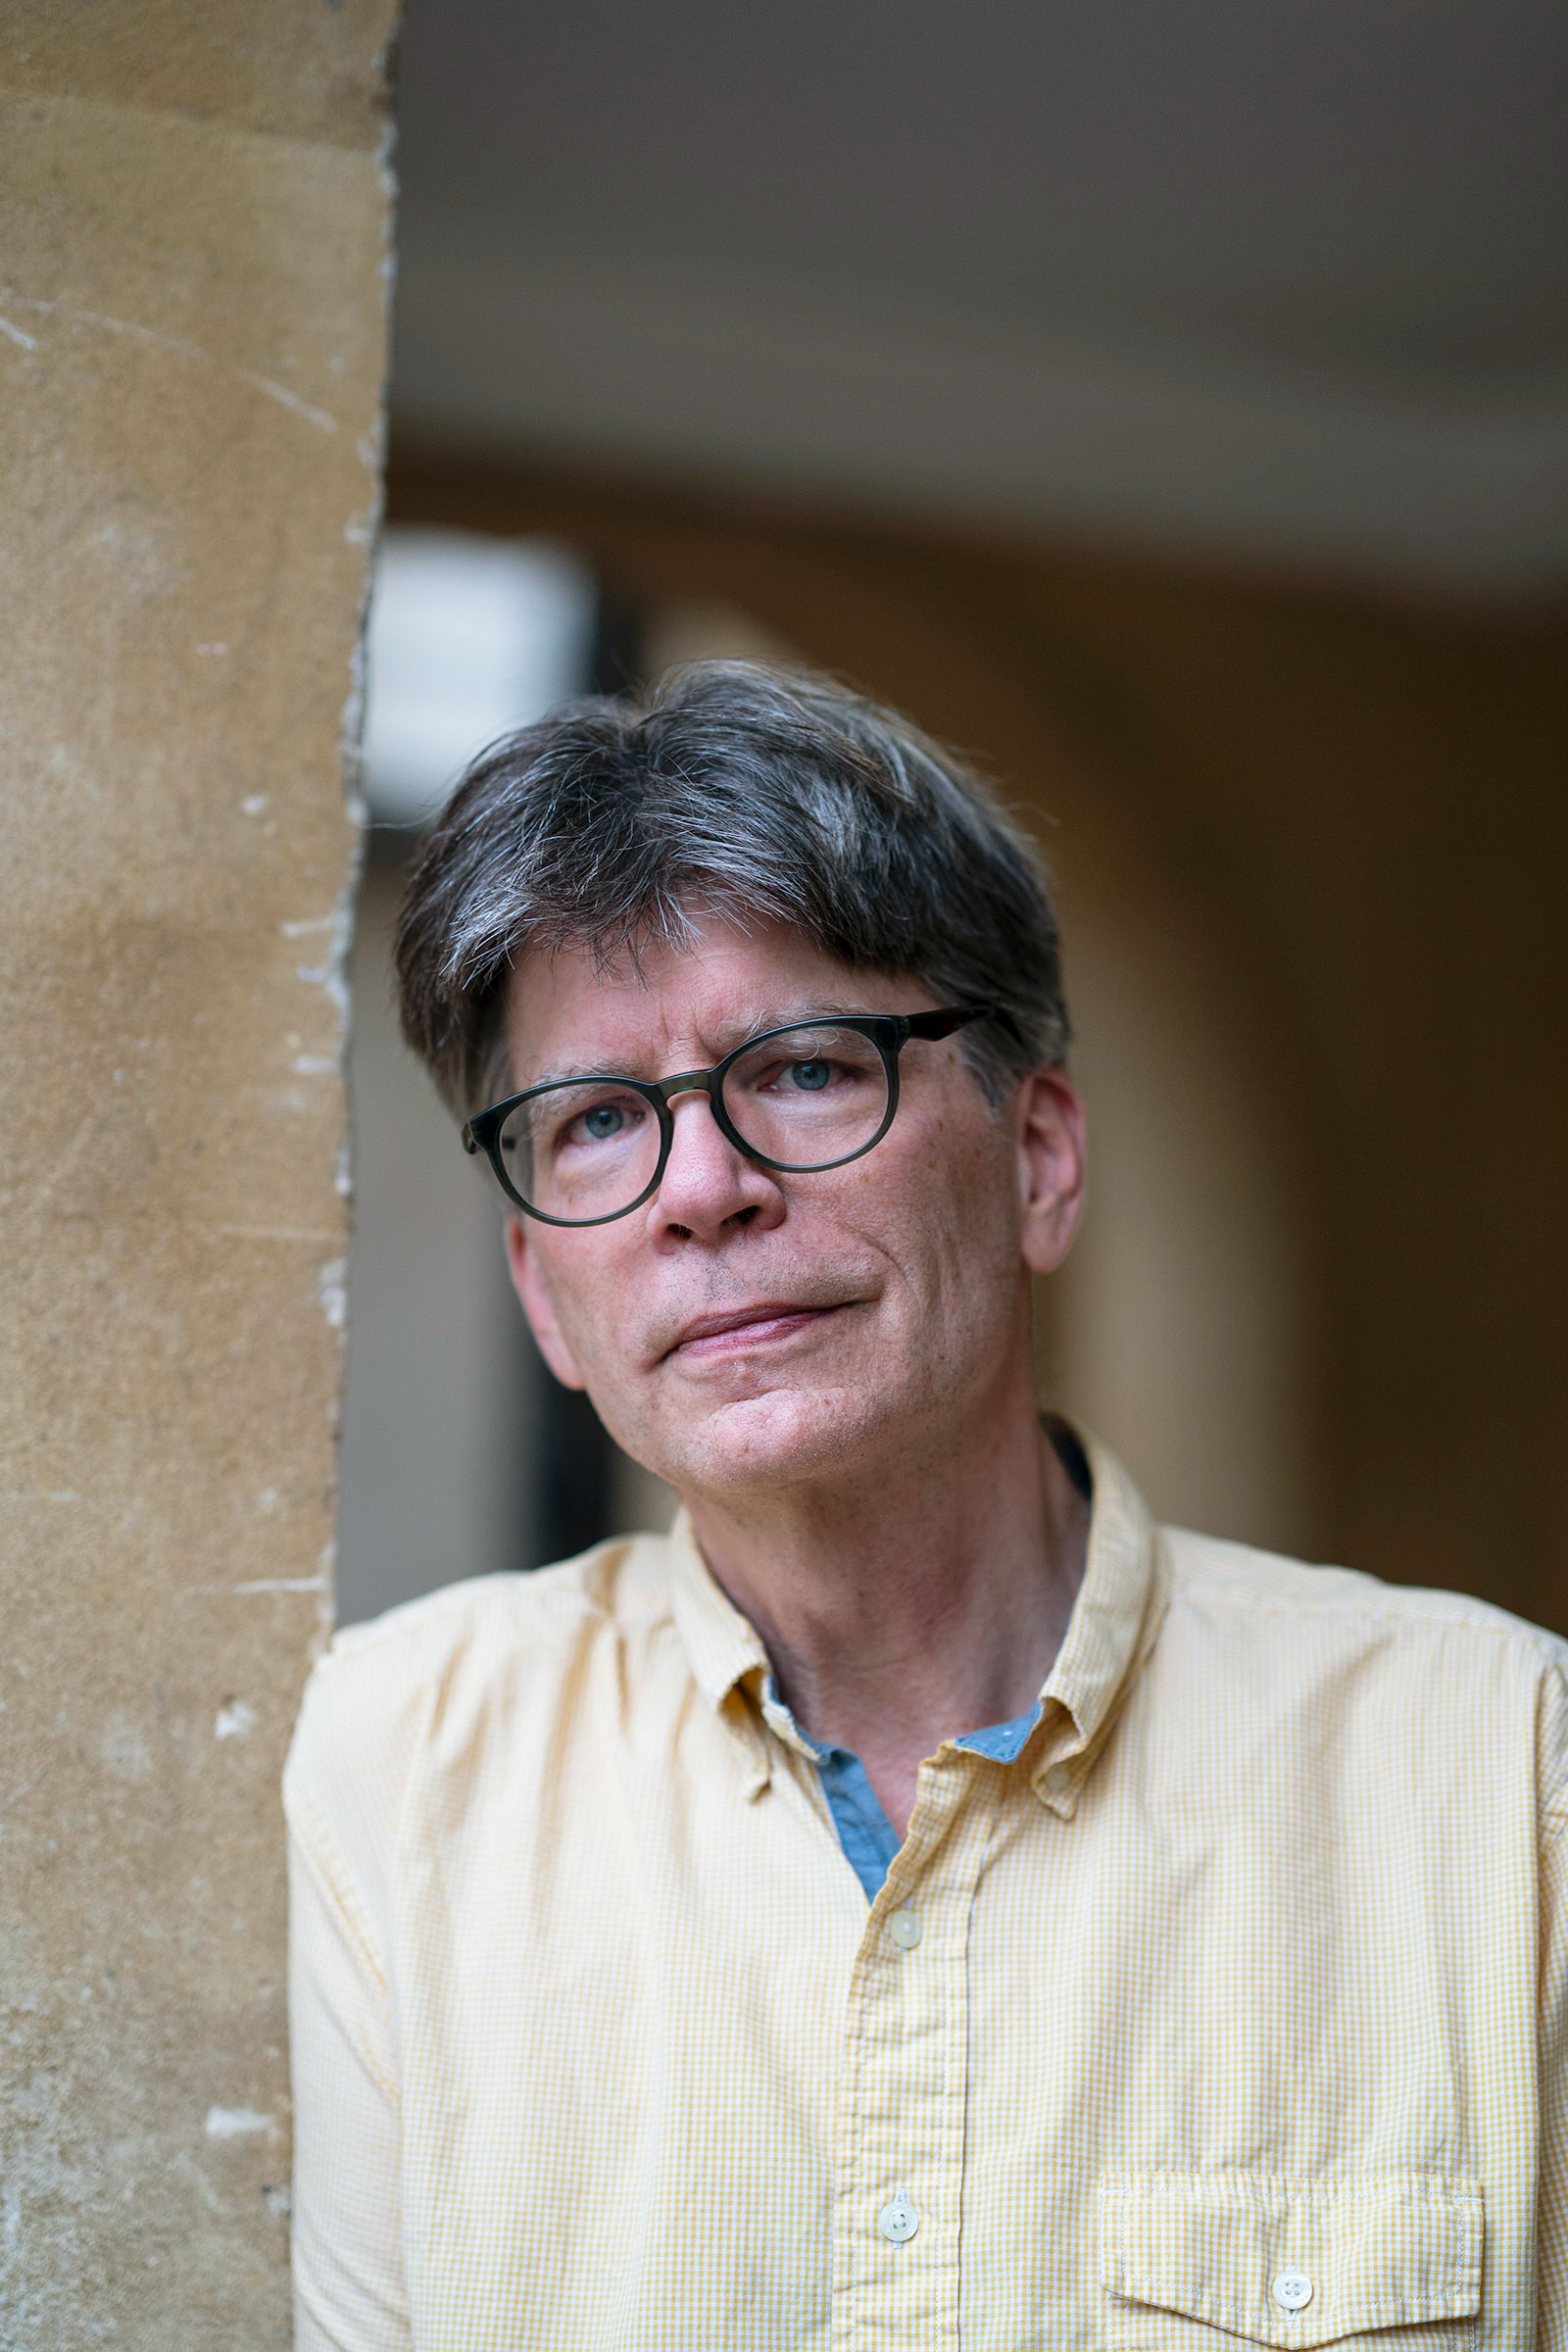 Richard Powers in England on Oct. 13, 2018. (David Levenson—Getty Images)